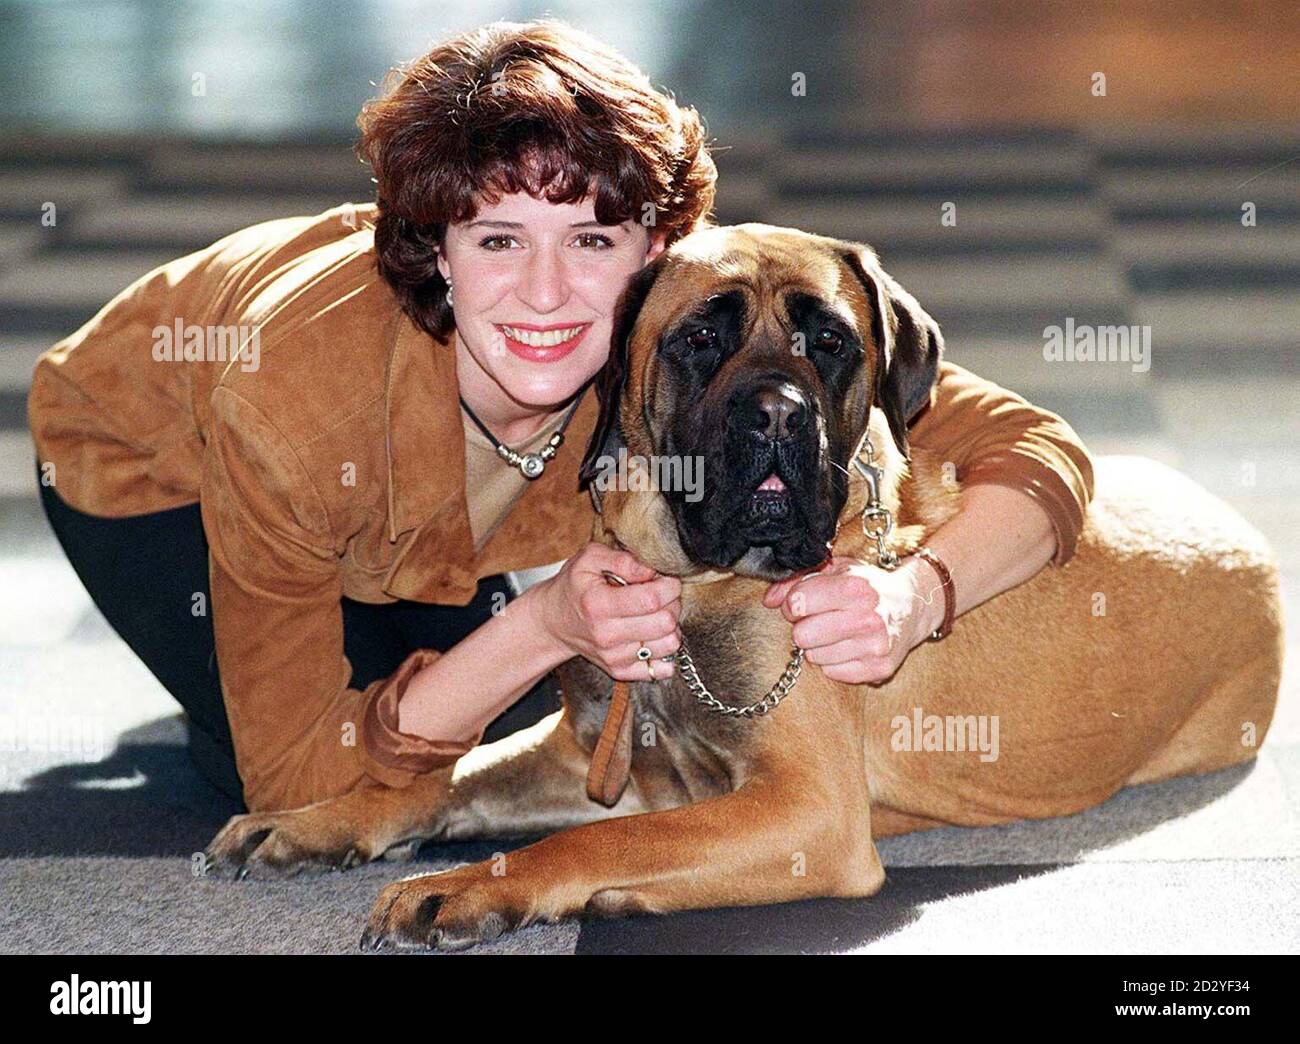 Lucky Dog! 'Chelsea,' an English Mastiff, curls up on the carpet with her famous owner, TV presenter Rosemarie Ford, to promote the 'Dog Obedience Scheme' at the opening day of Crufts Dog Show 1998 at Birmingham's NEC today (Thursday).  Photo by David Jones/PA Stock Photo